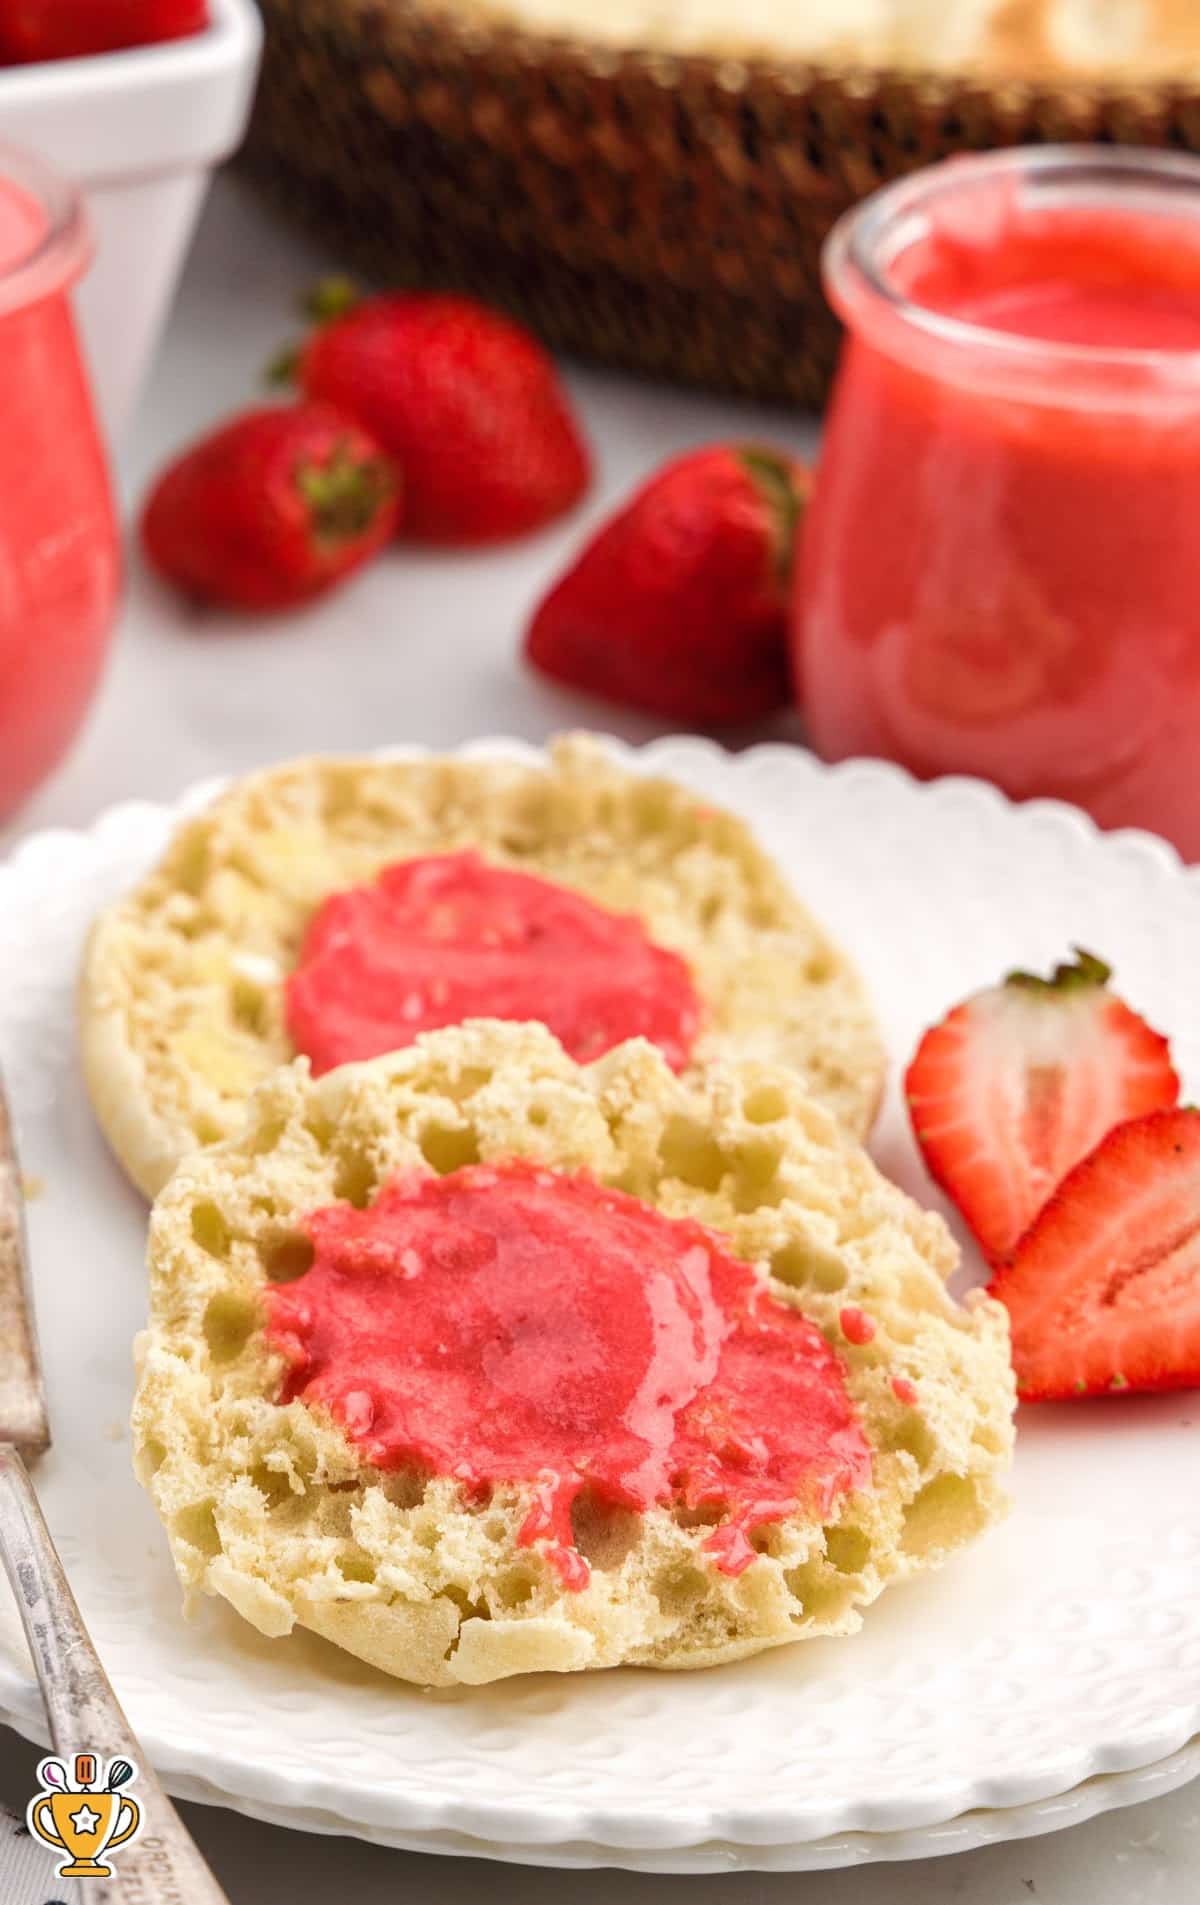 strawberry curd on an english muffin for breakfast